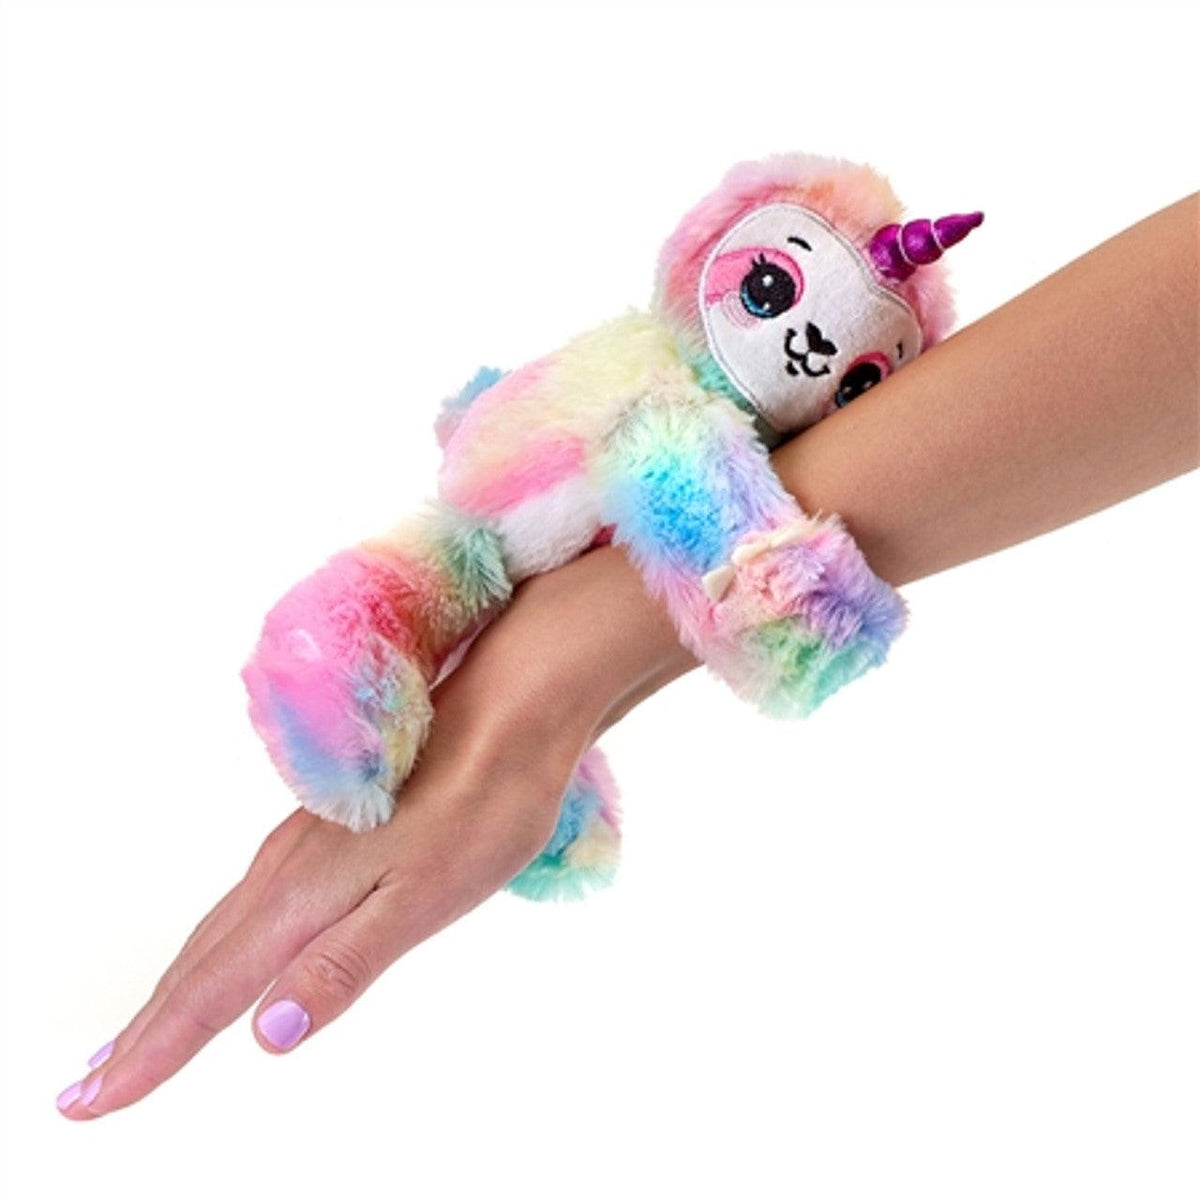 Example how how the animal toy wraps its arms around your forearm